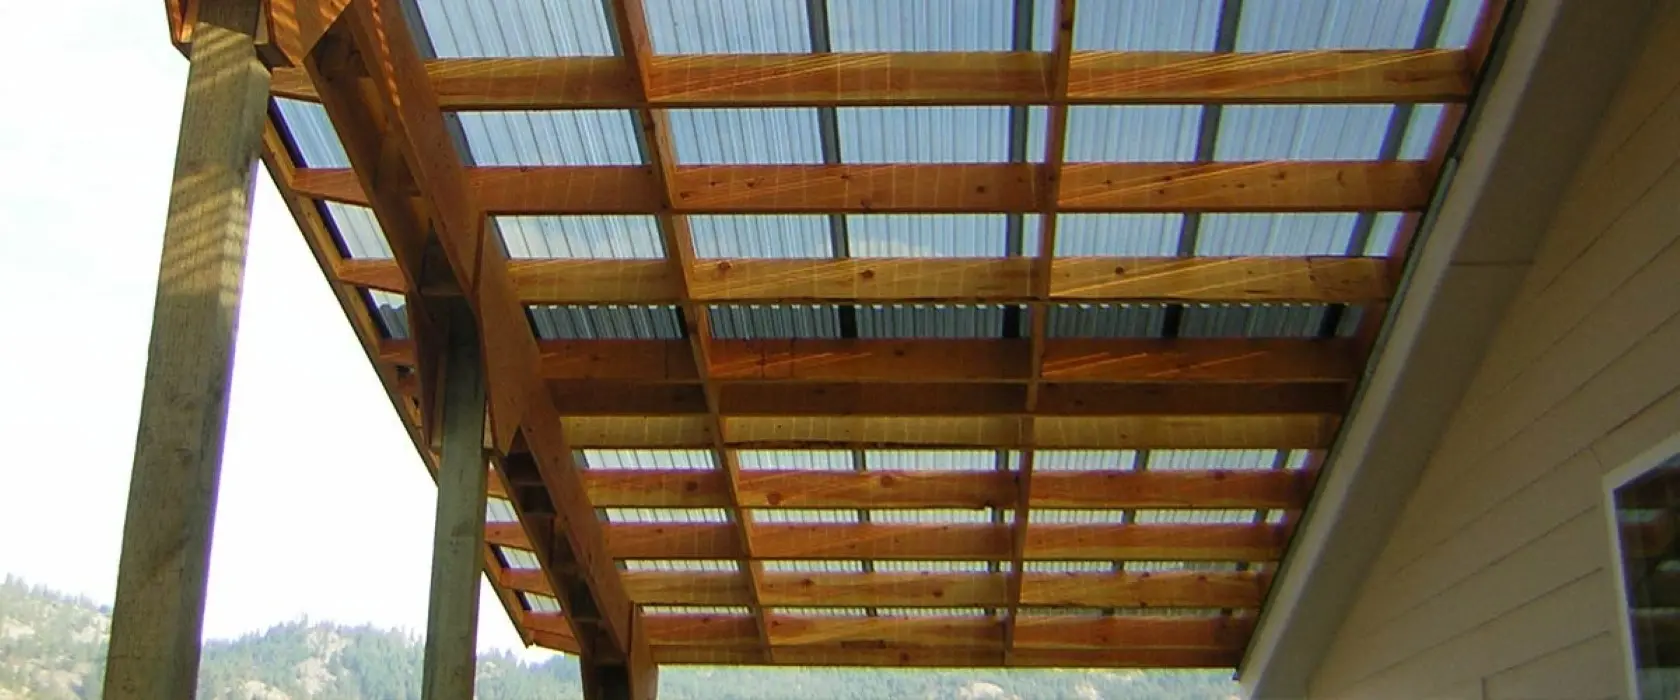 smoked roof panels - Which is better fiberglass or polycarbonate